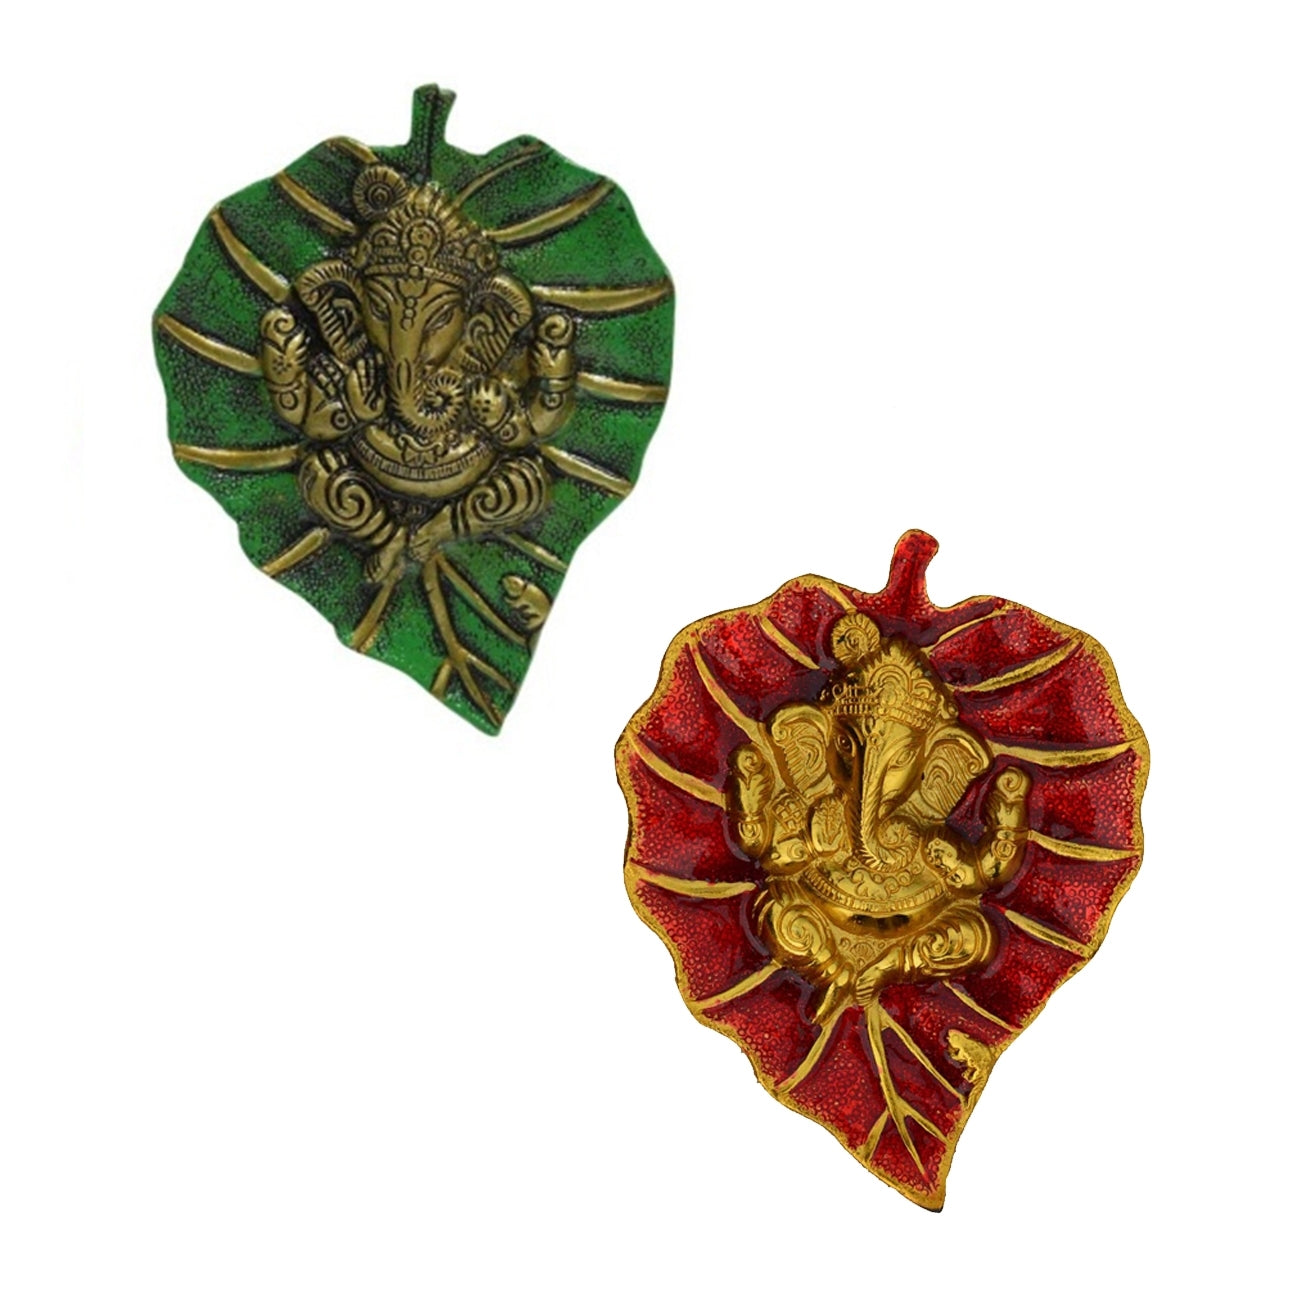 Lord Ganesha Idol On Green And Red Leaf Set Of 2 Metal Wall Hangings